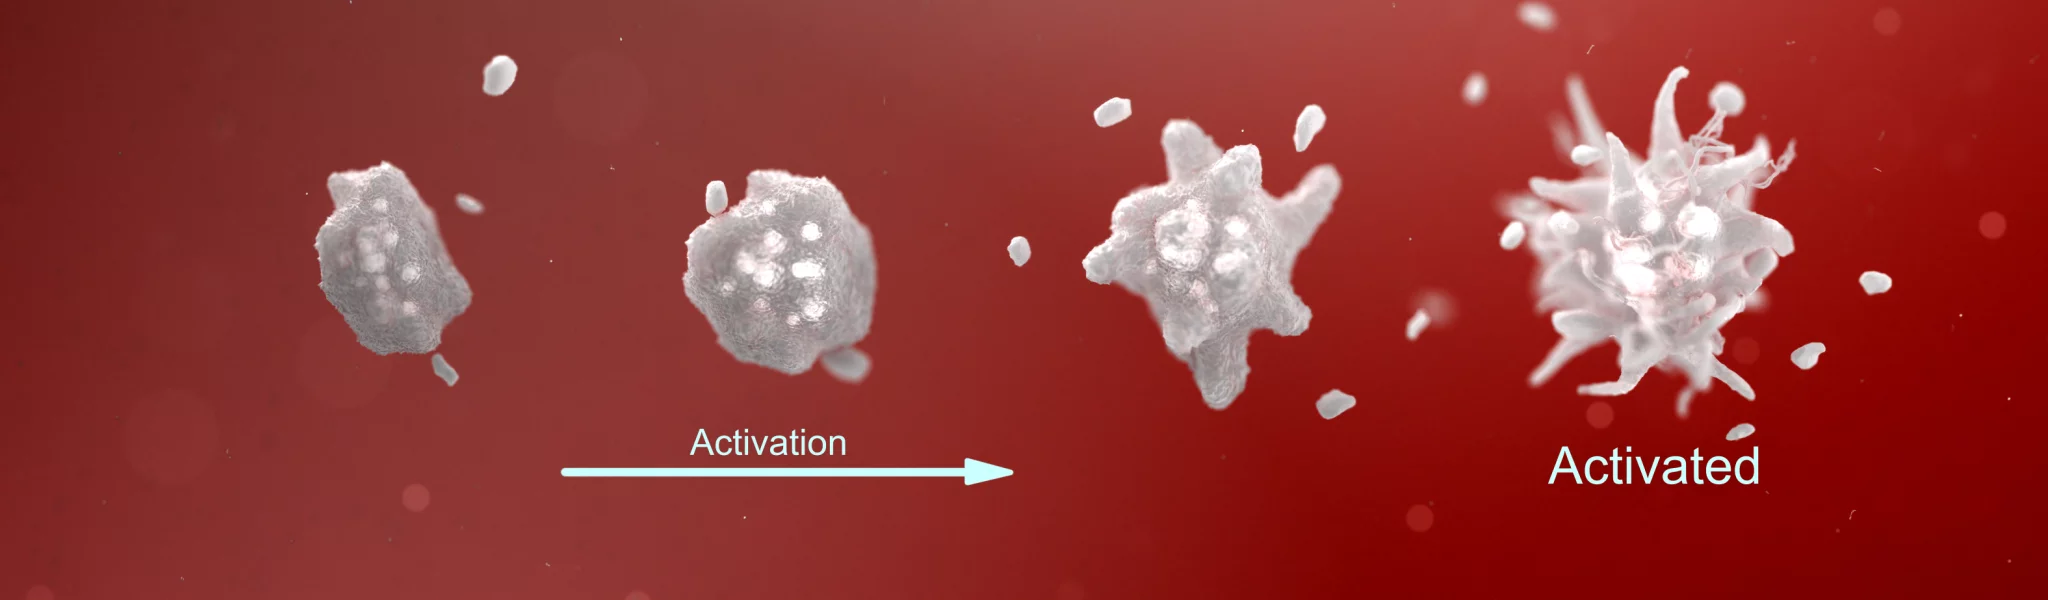 3d illustration of platelet cell showing the cell changing shape from resting to activated.